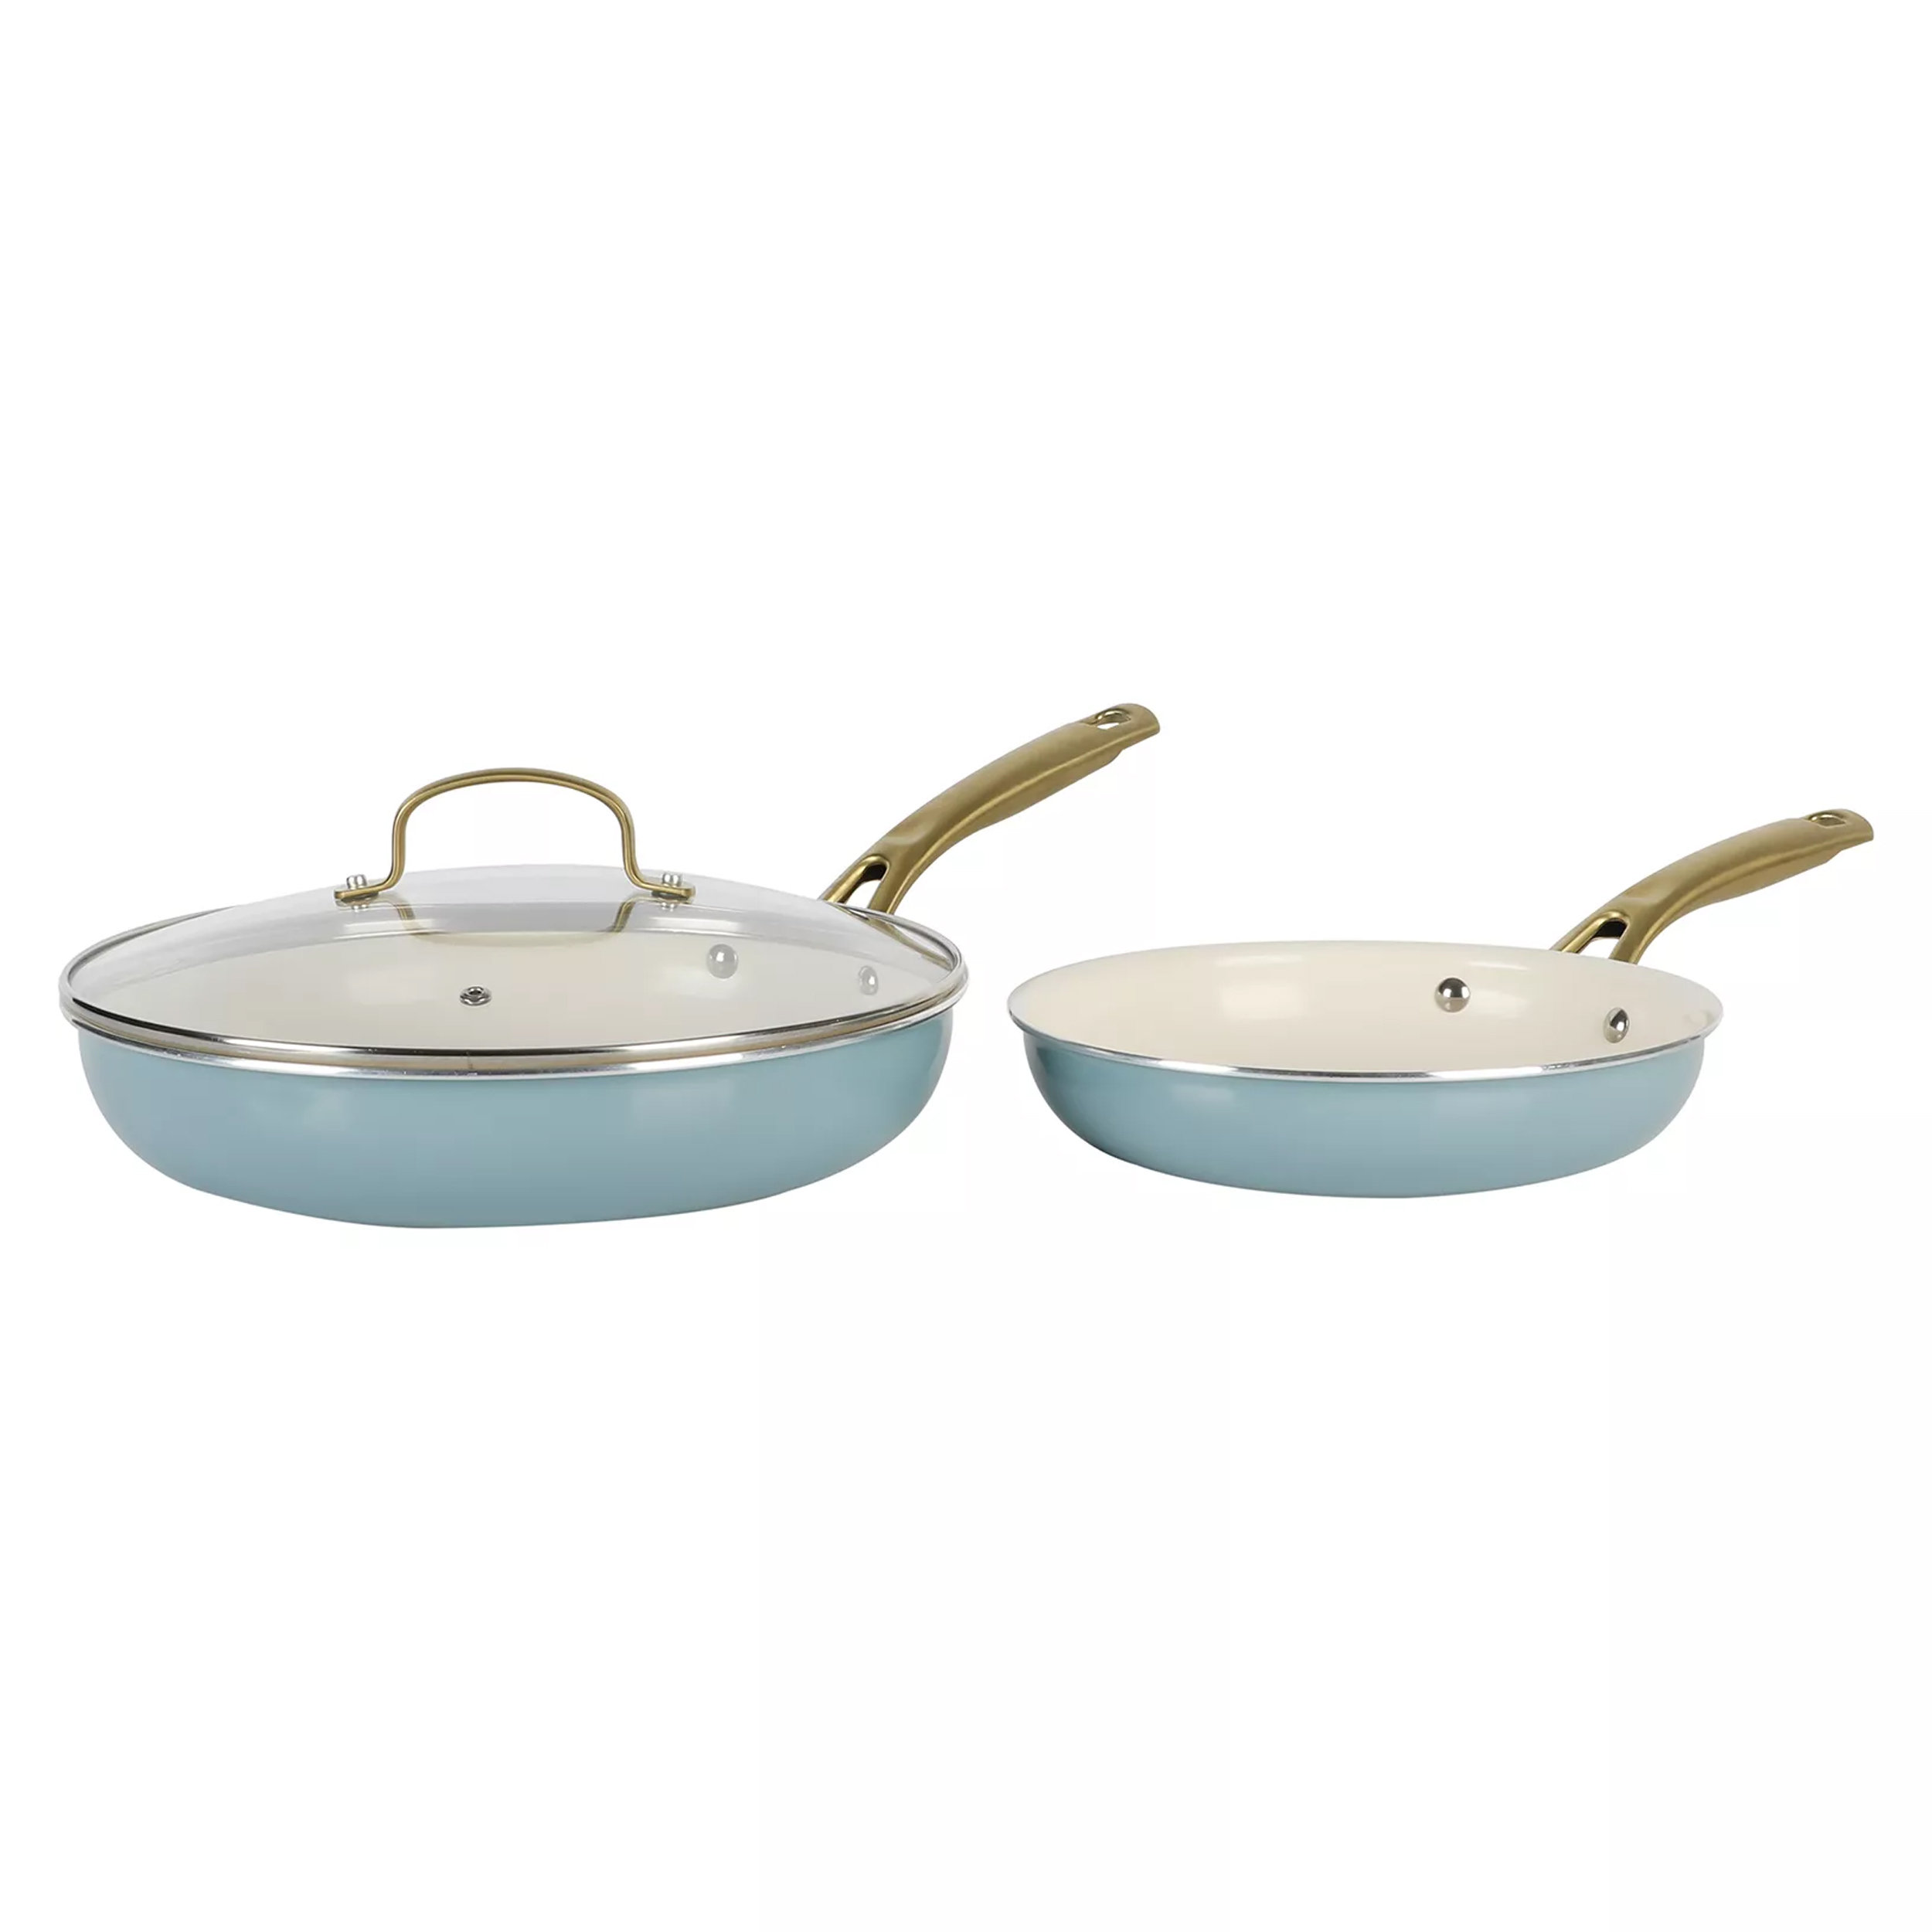 Wolfgang Puck 3-Piece Stainless Steel Skillet Set, Scratch-Resistant Non-Stick Coating